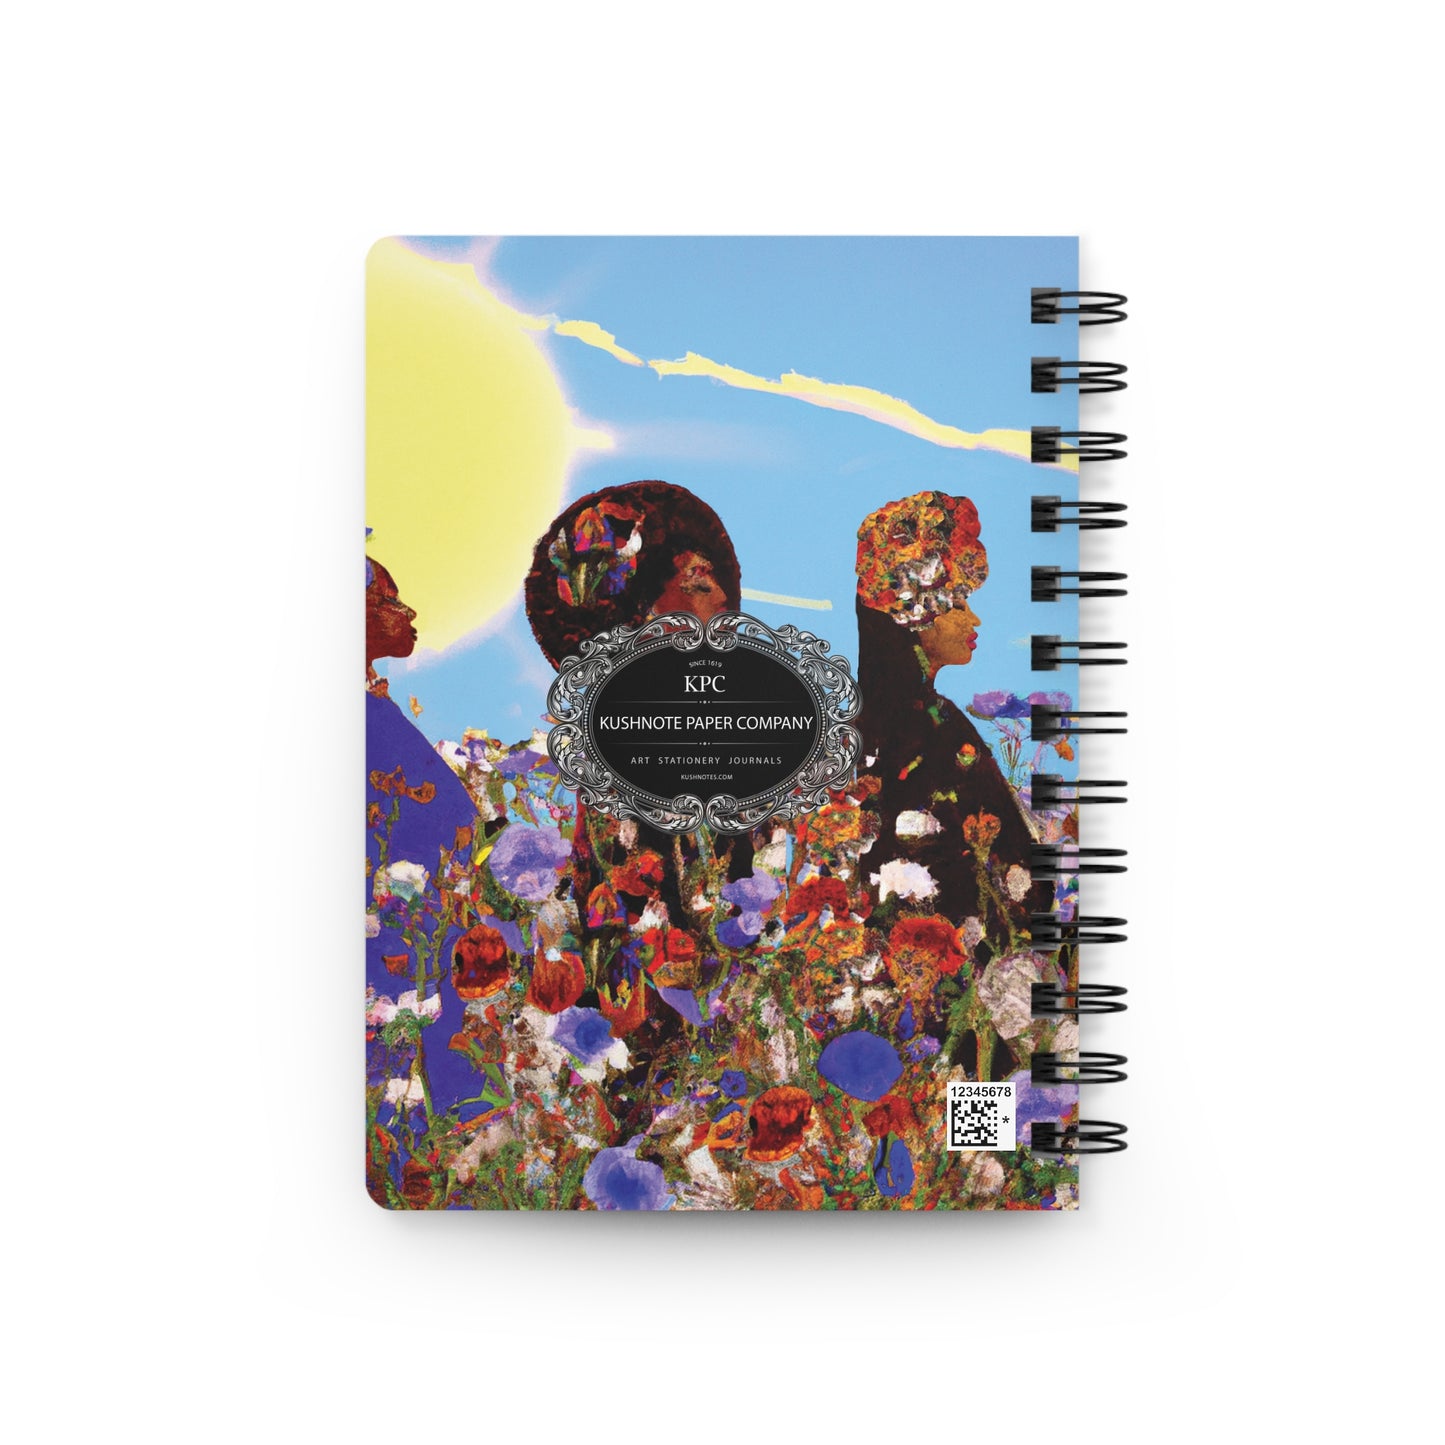 Beautiful Ones Spiral Bound Notebooks and Journals with 2023-2024 Year-at-a-Glance Calendar